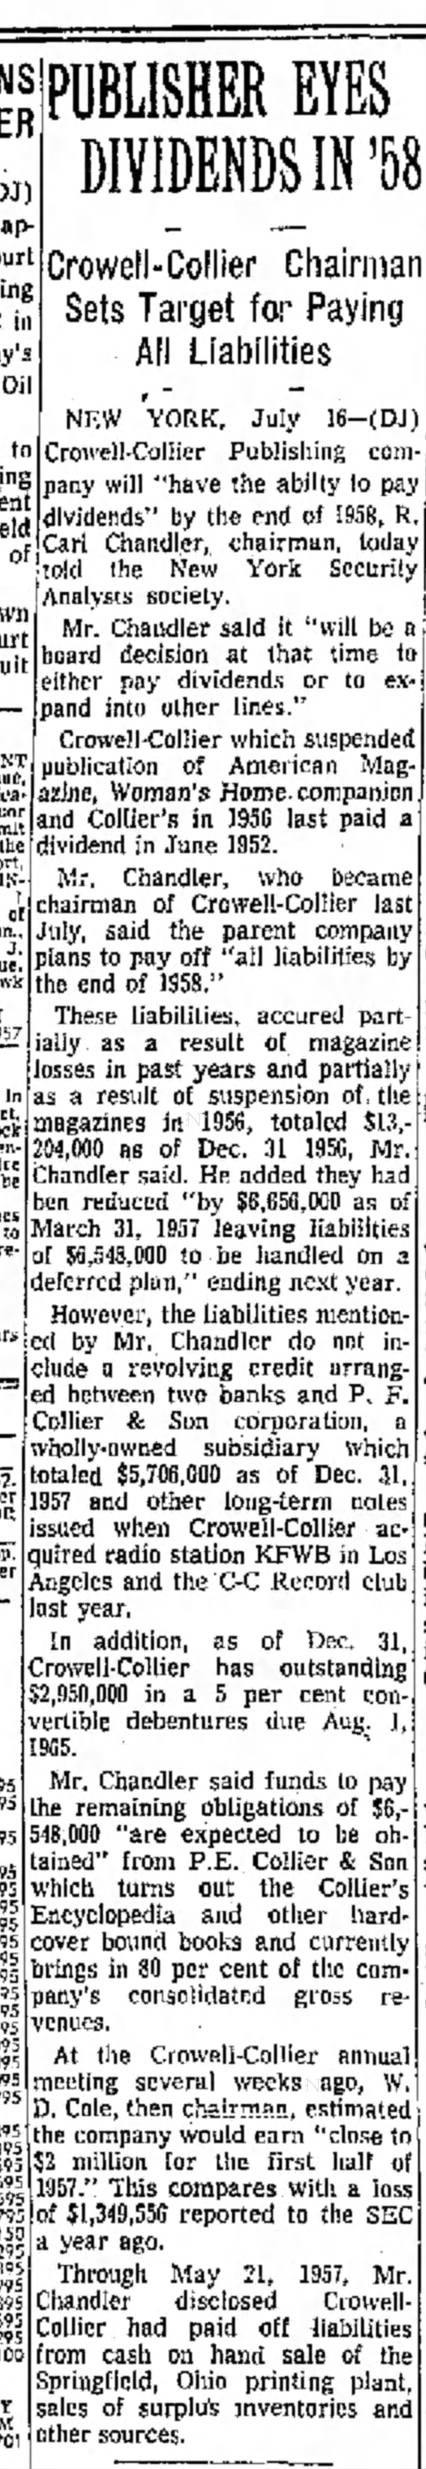 P.F. Collier 80% of Crowell Collier Revenues. 1957